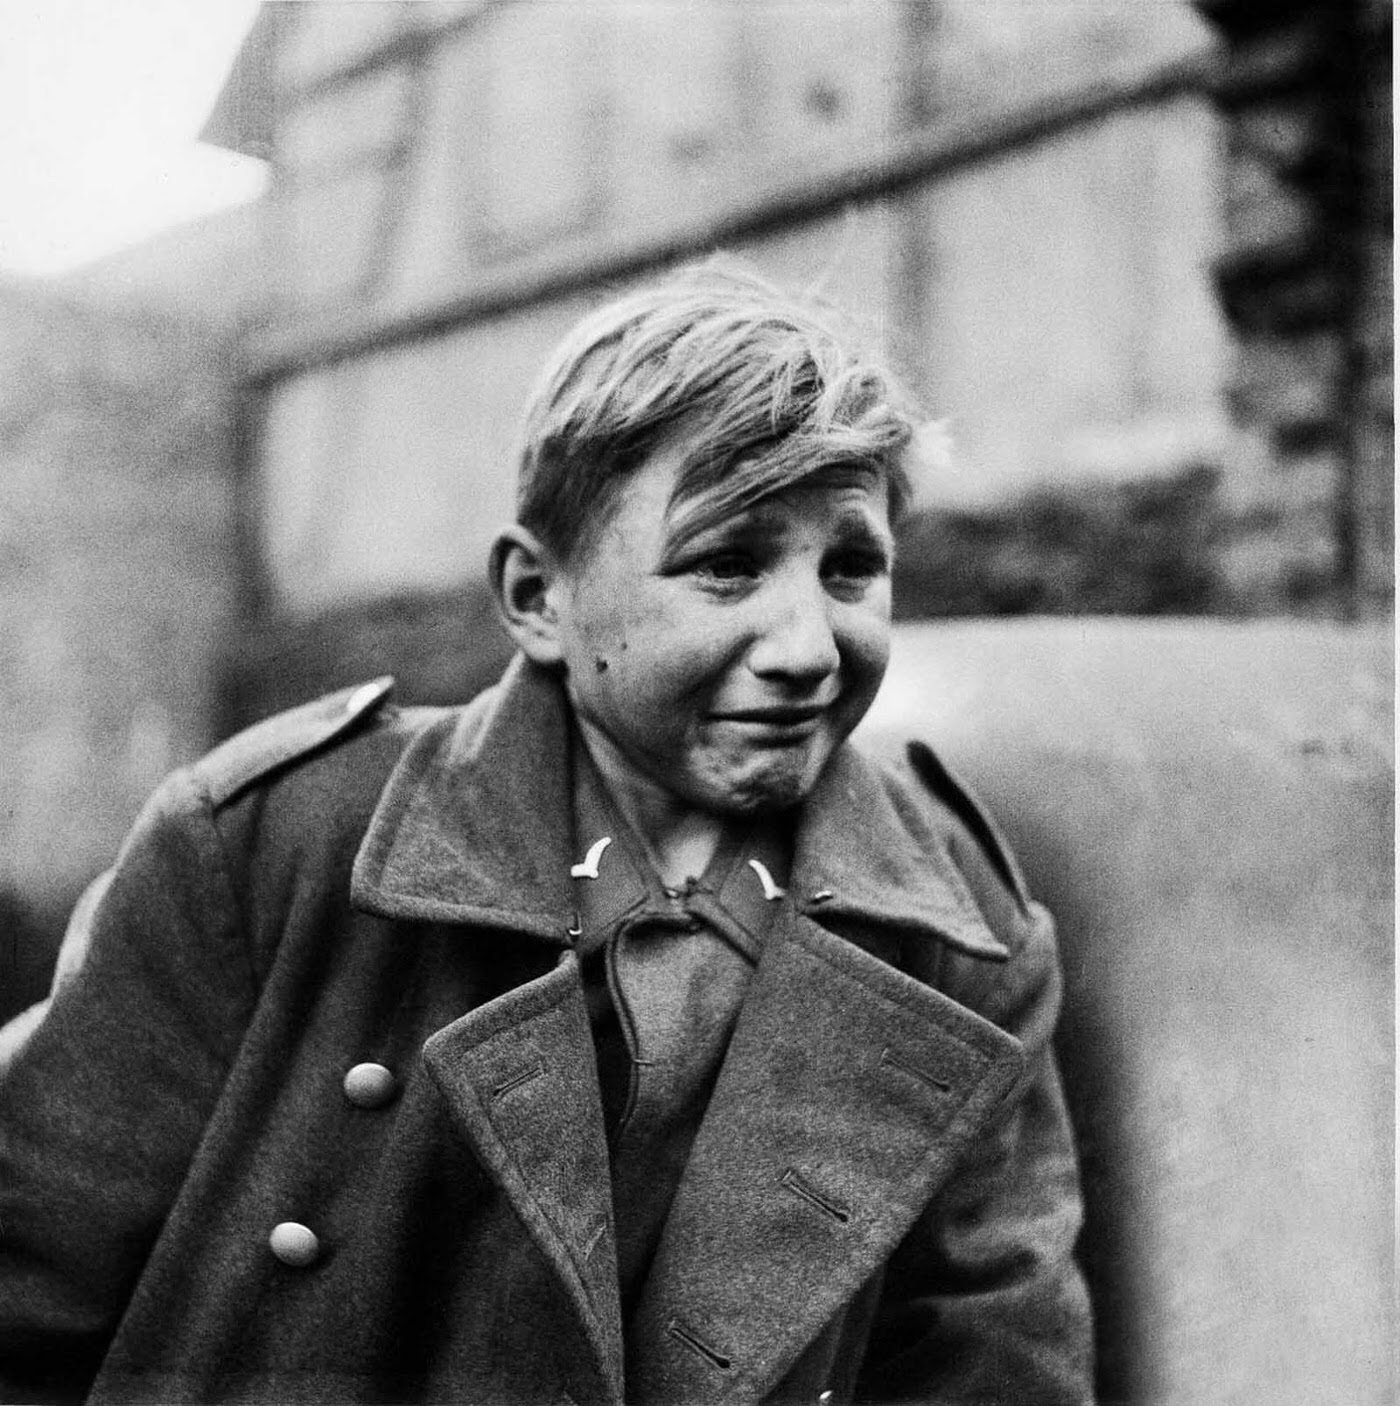 A sixteen-year-old German soldier, Hans-Georg Henke, cries being captured by the US 9th Army in Germany on April 3, 1945